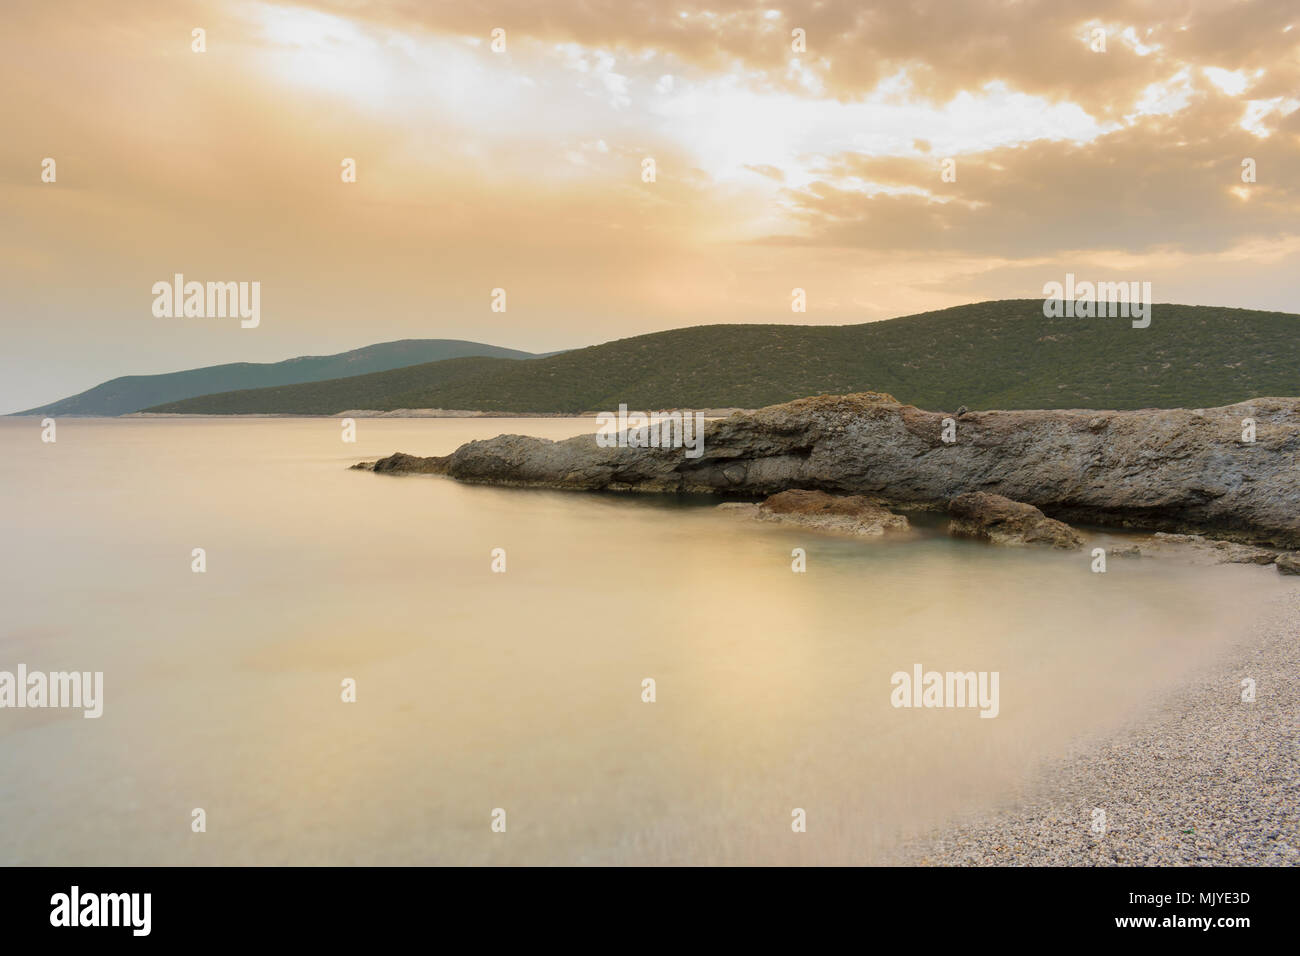 Sunset seascape - Long exposure rock formations into the sea at sunset Stock Photo